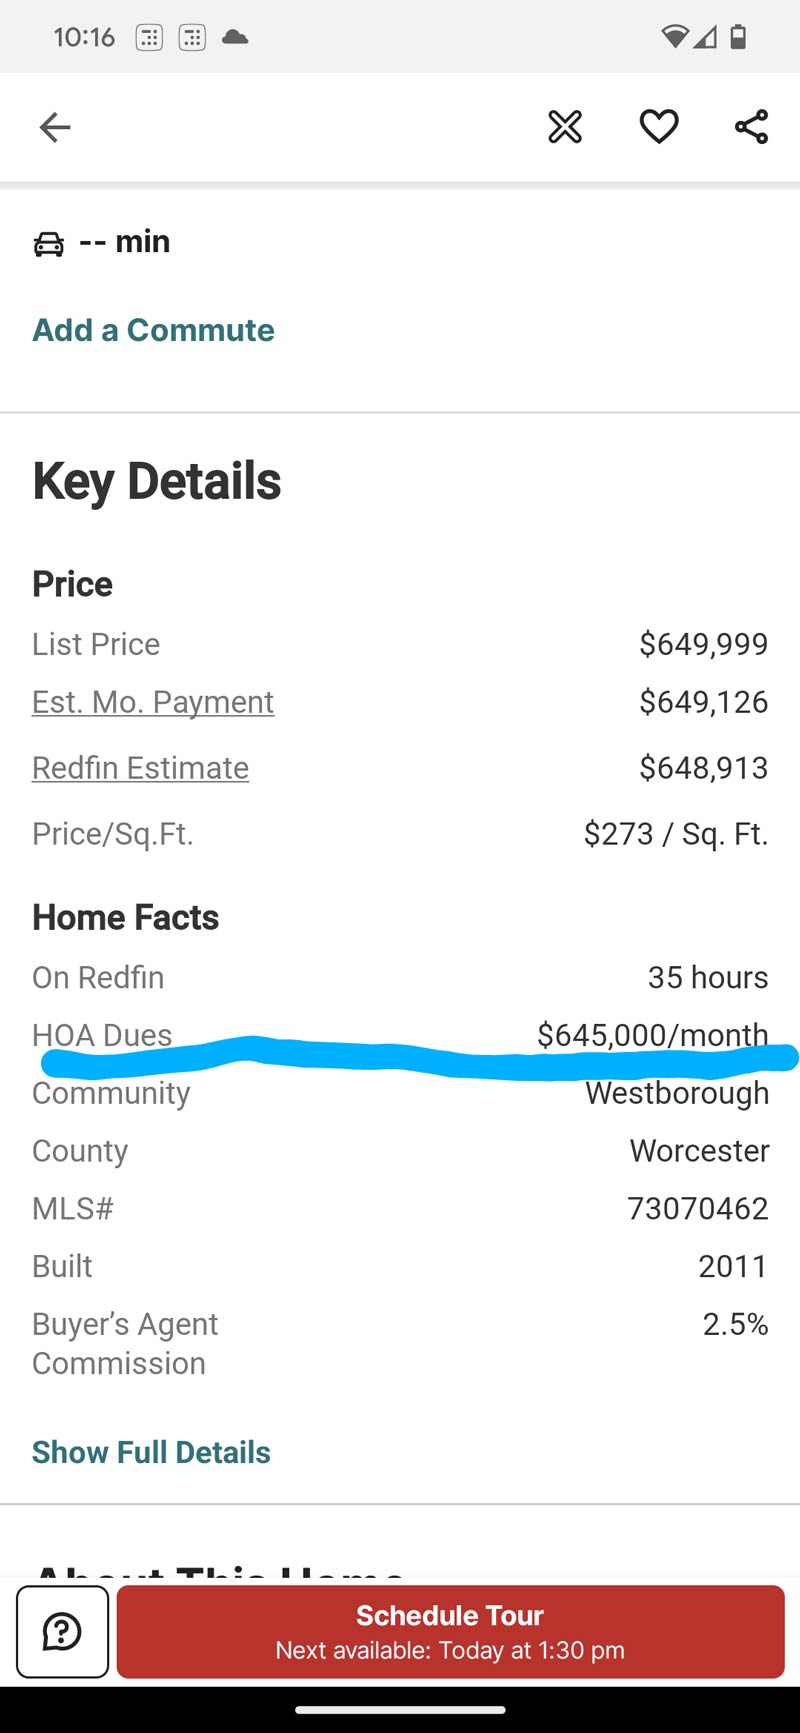 The housing market in my town is a bit much